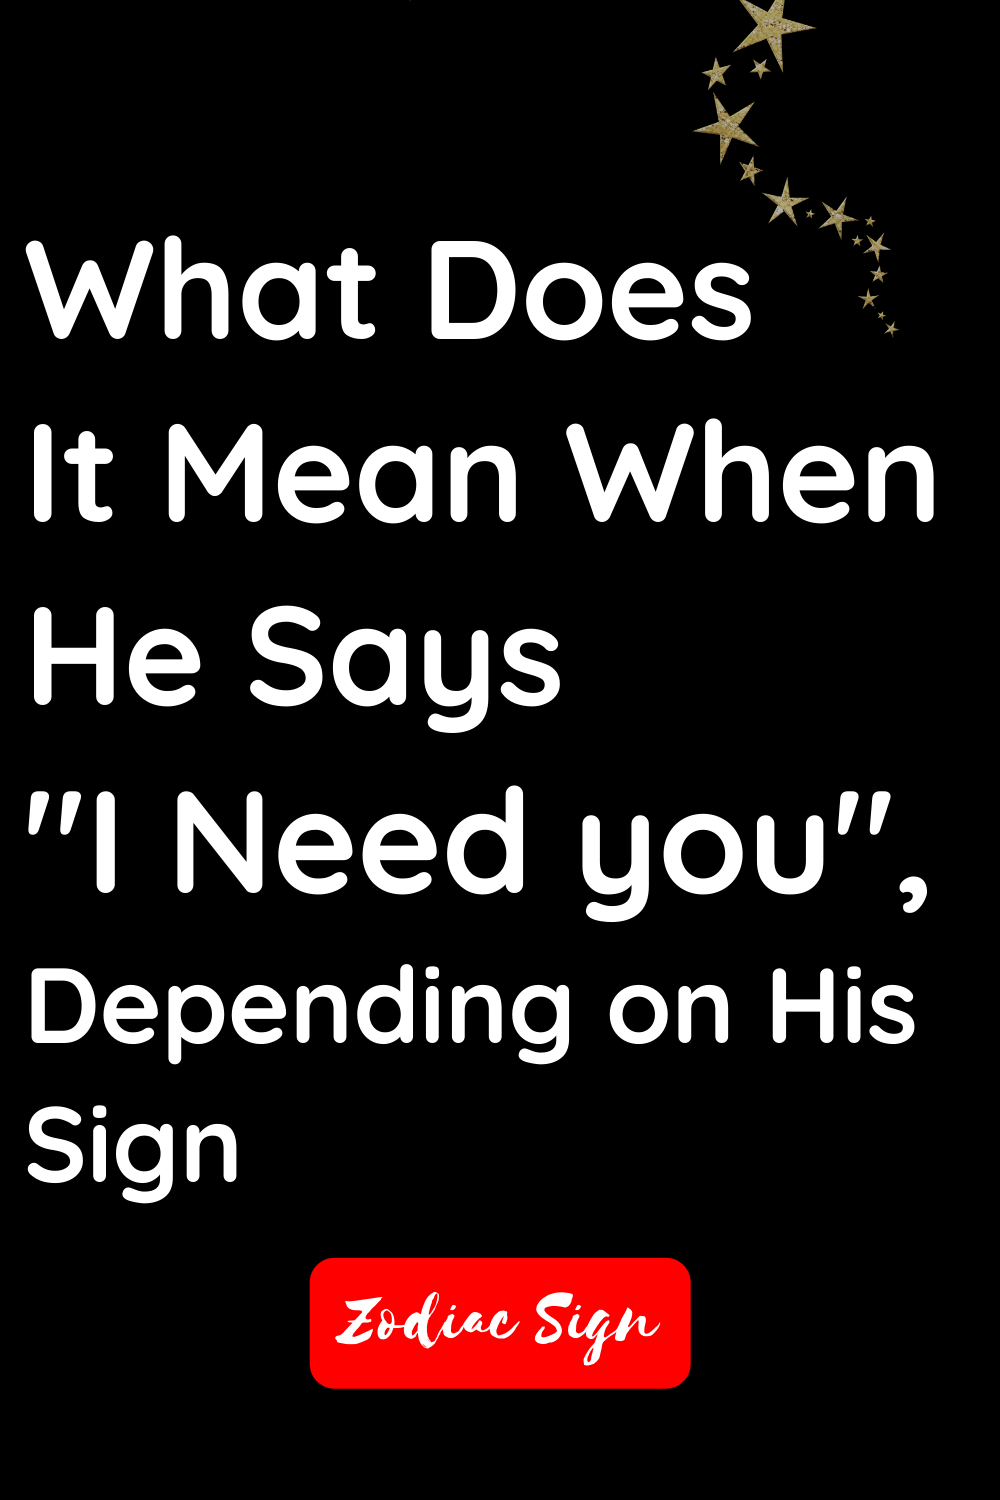 What does it mean when he says "I need you", depending on his sign